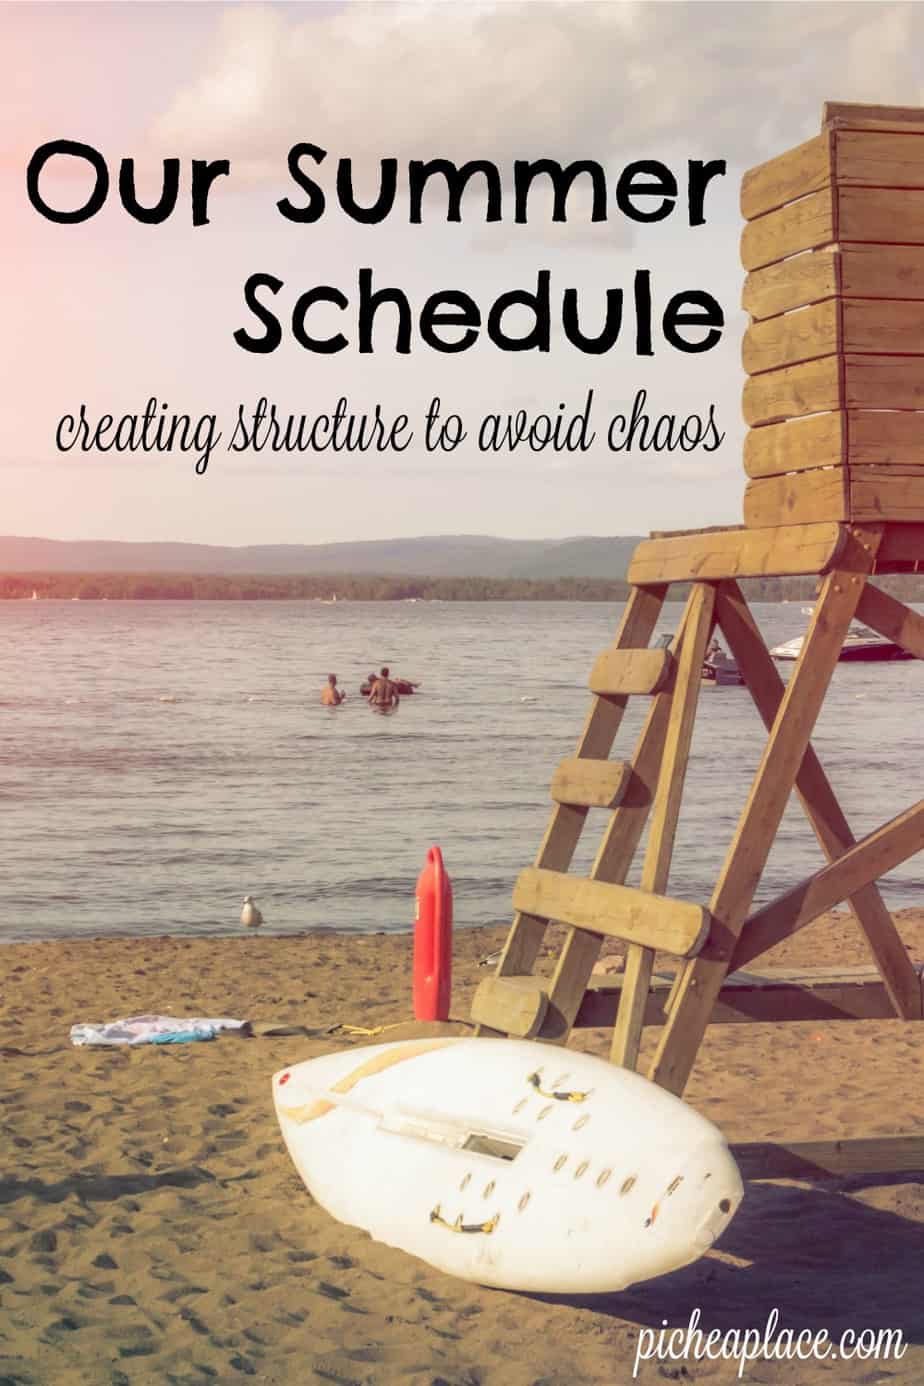 While there is definitely some structure to our daily routine, I have also left plenty of free time for them to be able to enjoy this summer. I have also warned the kids that there will be a lot of days where we will not follow this schedule exactly, but having a routine established will help us to run more smoothly this summer. | Our Summer Schedule: Creating Structure to Avoid Chaos